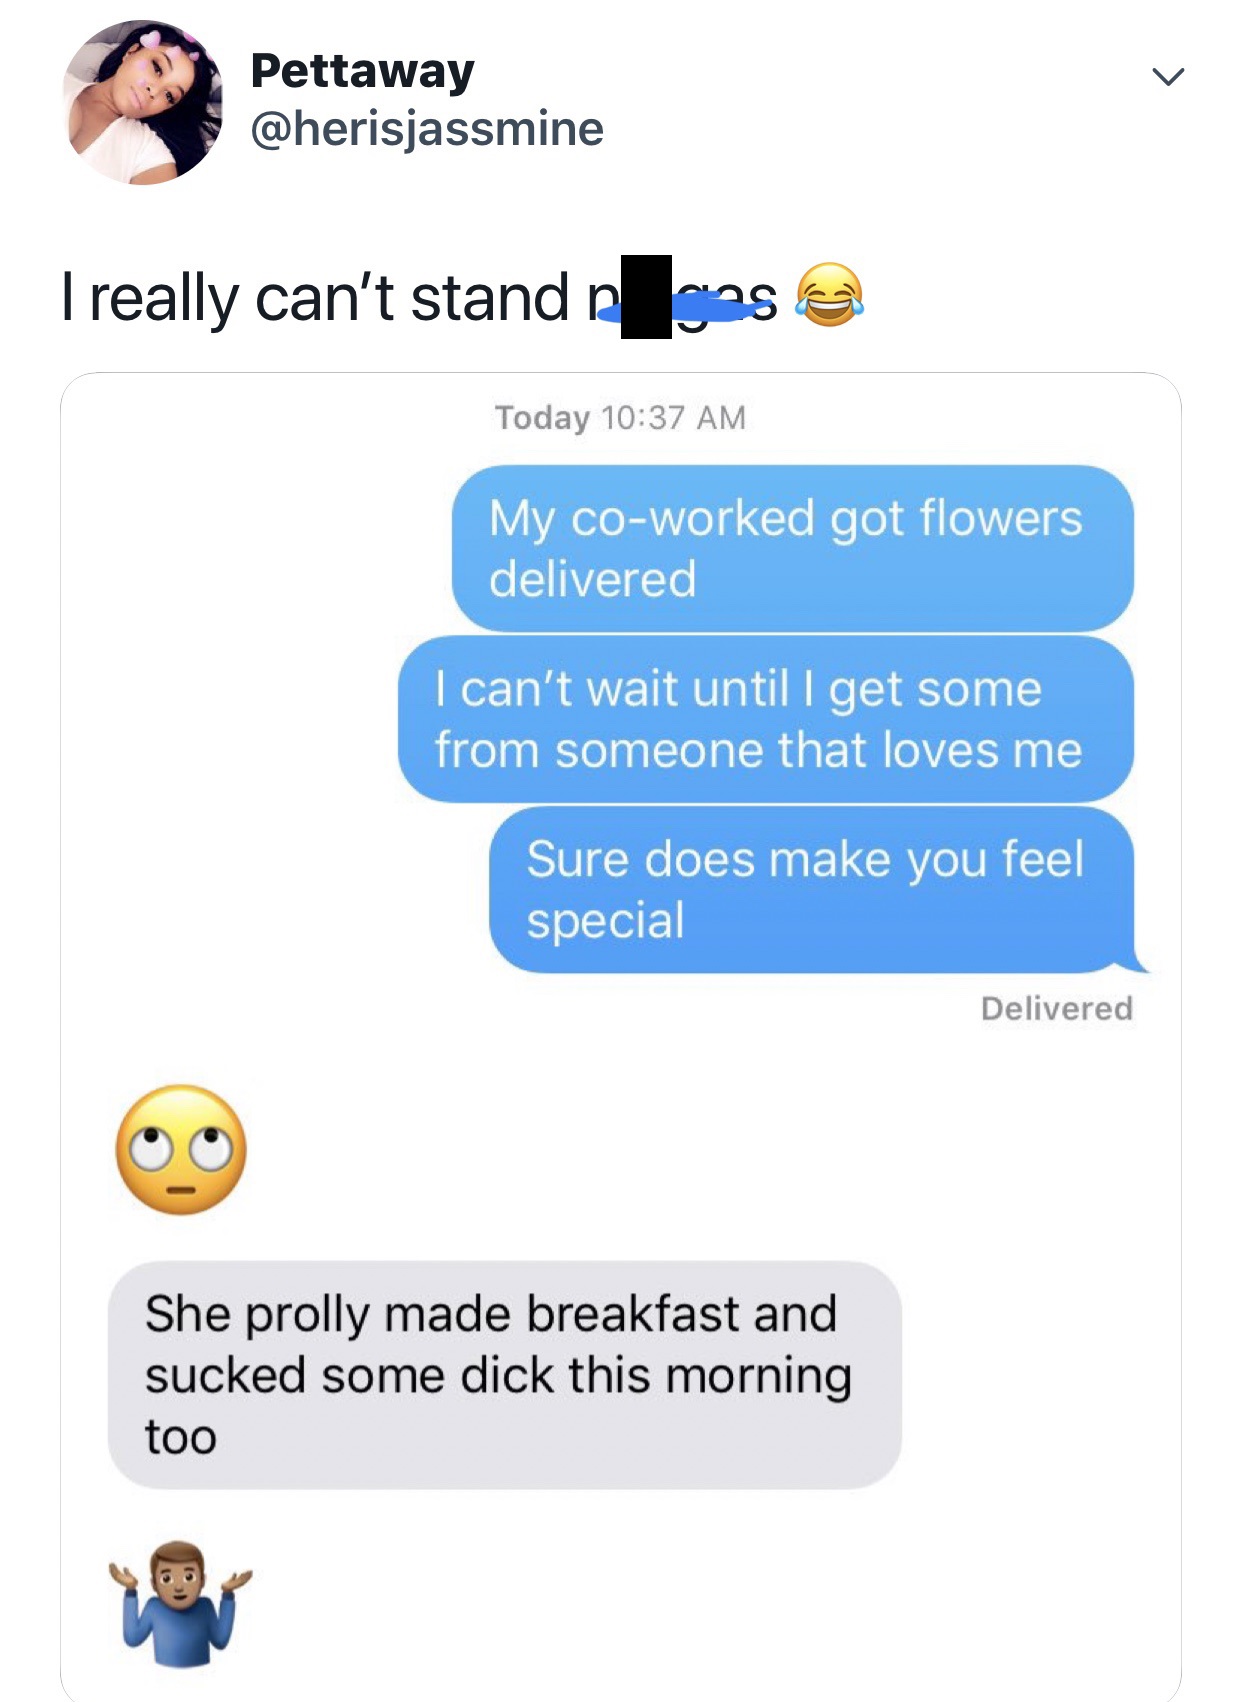 black twitter - web page - Pettaway I really can't stand n as Today My coworked got flowers delivered I can't wait until I get some from someone that loves me Sure does make you feel special Delivered She prolly made breakfast and sucked some dick this mo